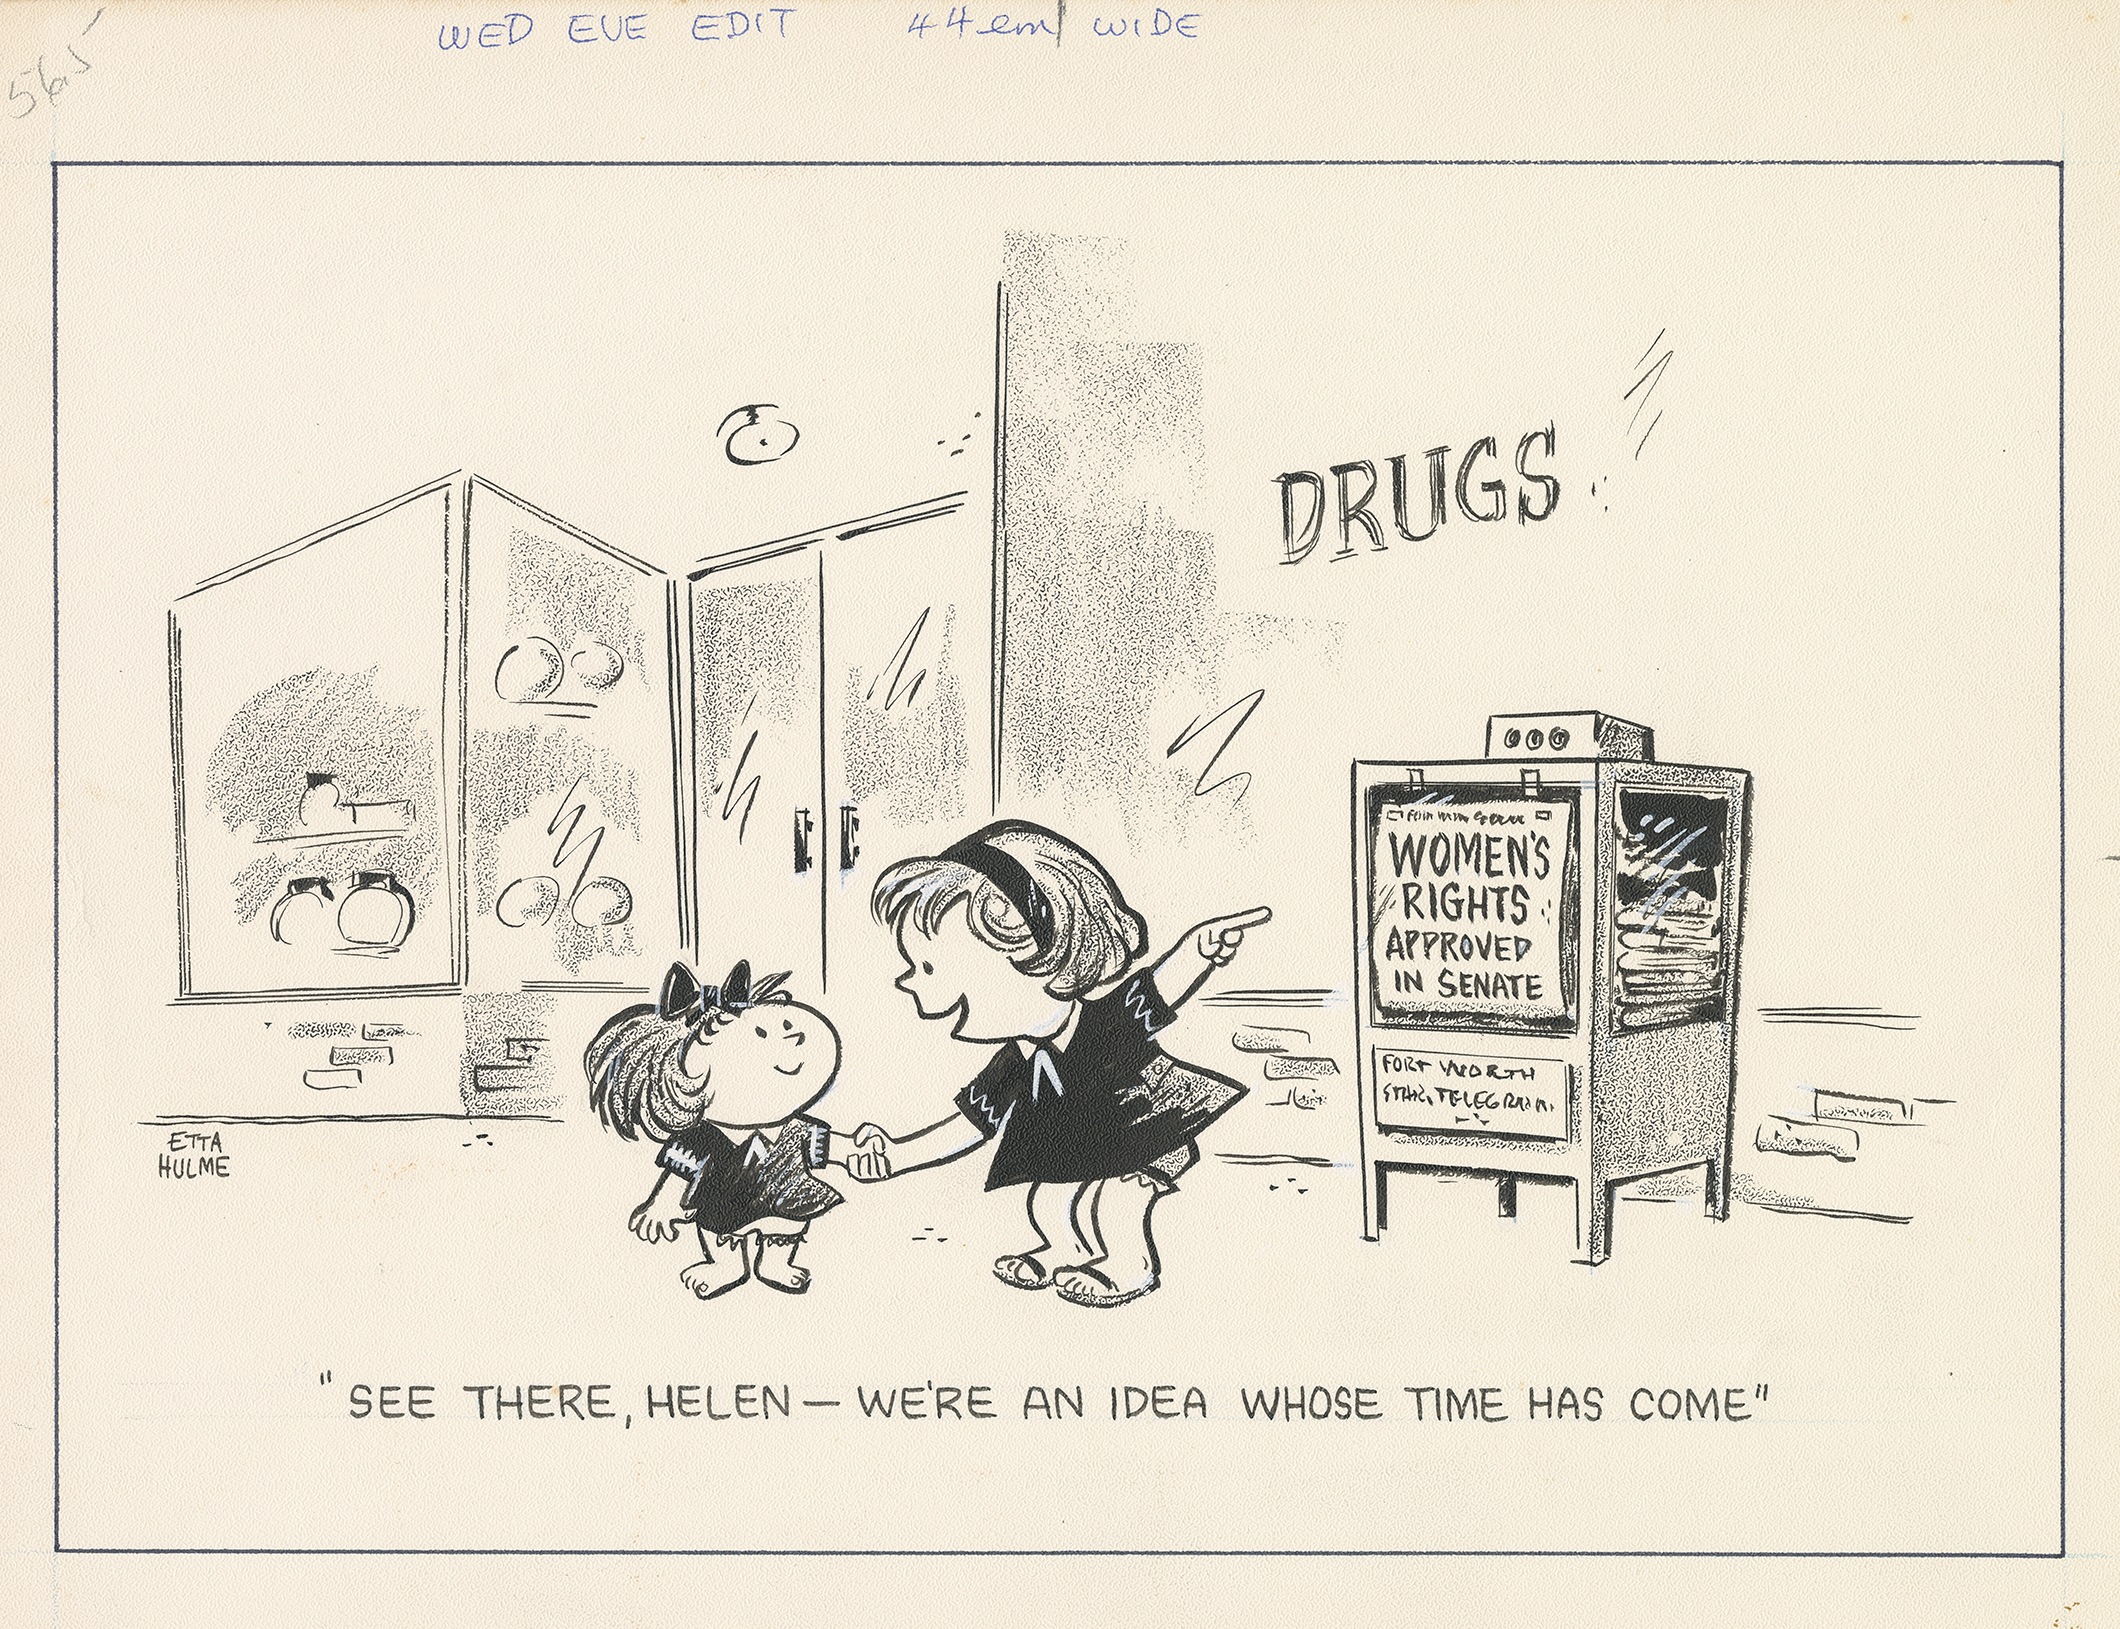 Political cartoon by Etta Hulme. The cartoon shows a girl talking to a younger girl outside a drug store. There is a newspaper stand with newspapers, showing a headline that reads: "Women's Rights Approved in Senate." The caption reads: "See there, Helen--we're an idea whose time has come."